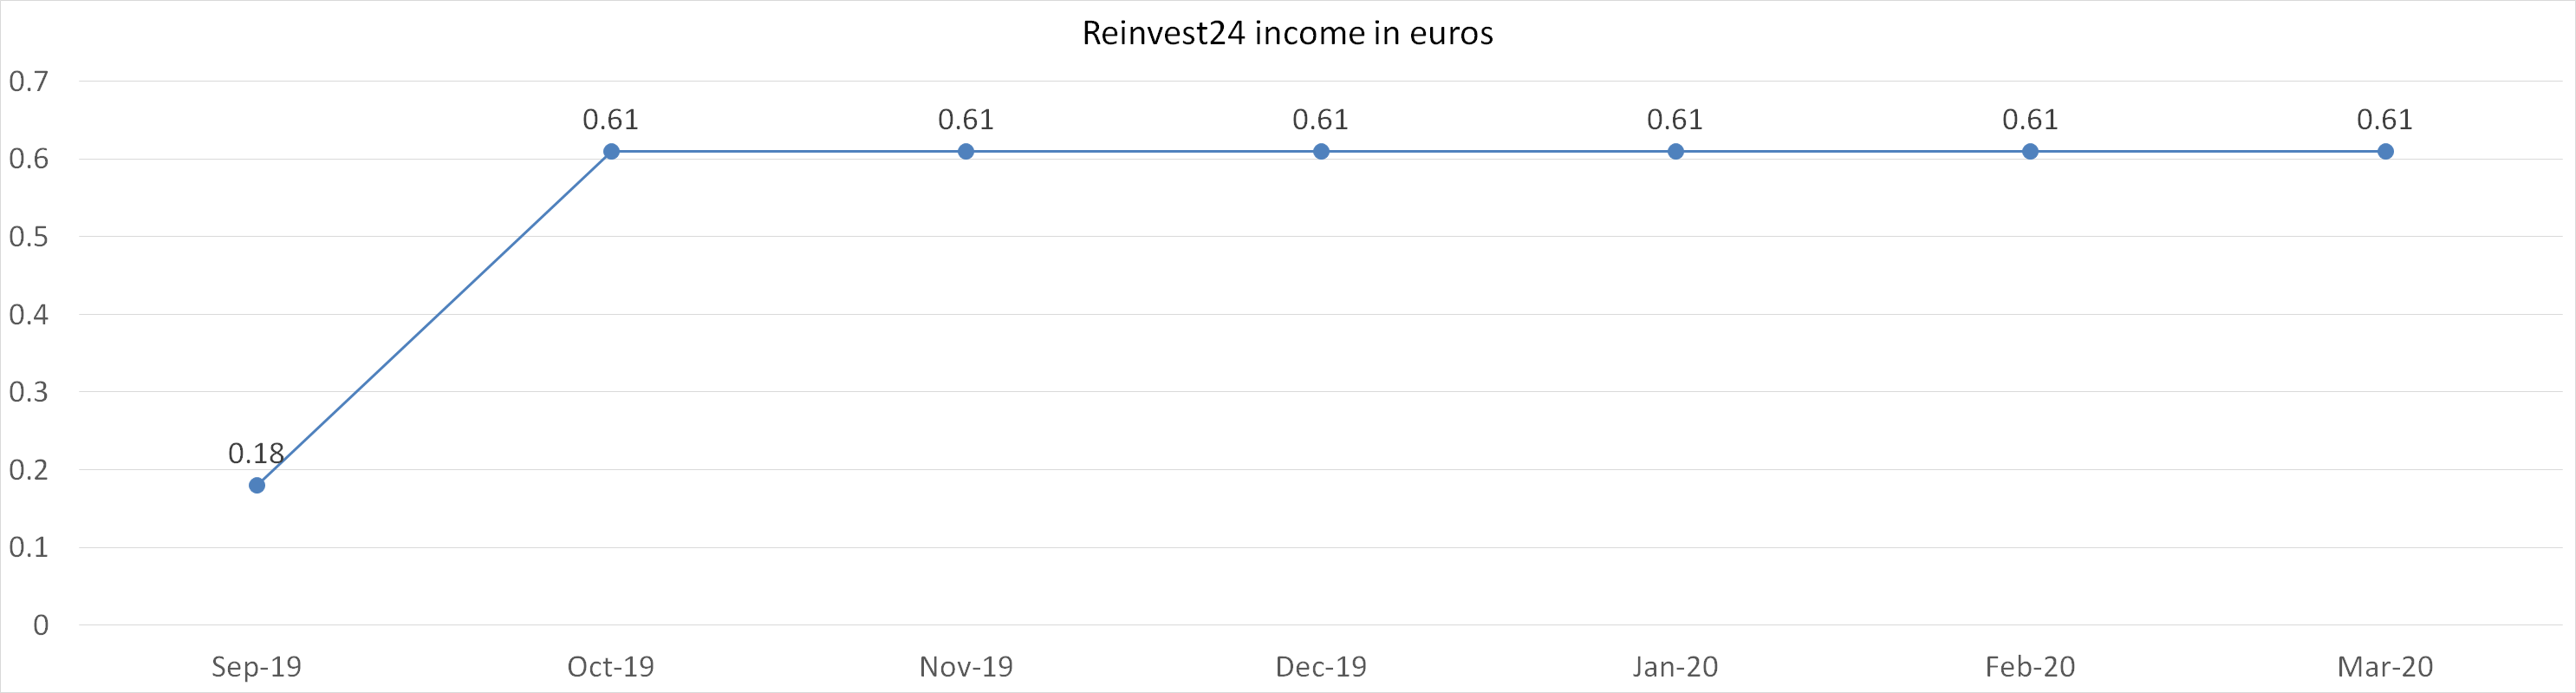 Reinvest24 income in euros in march 2020